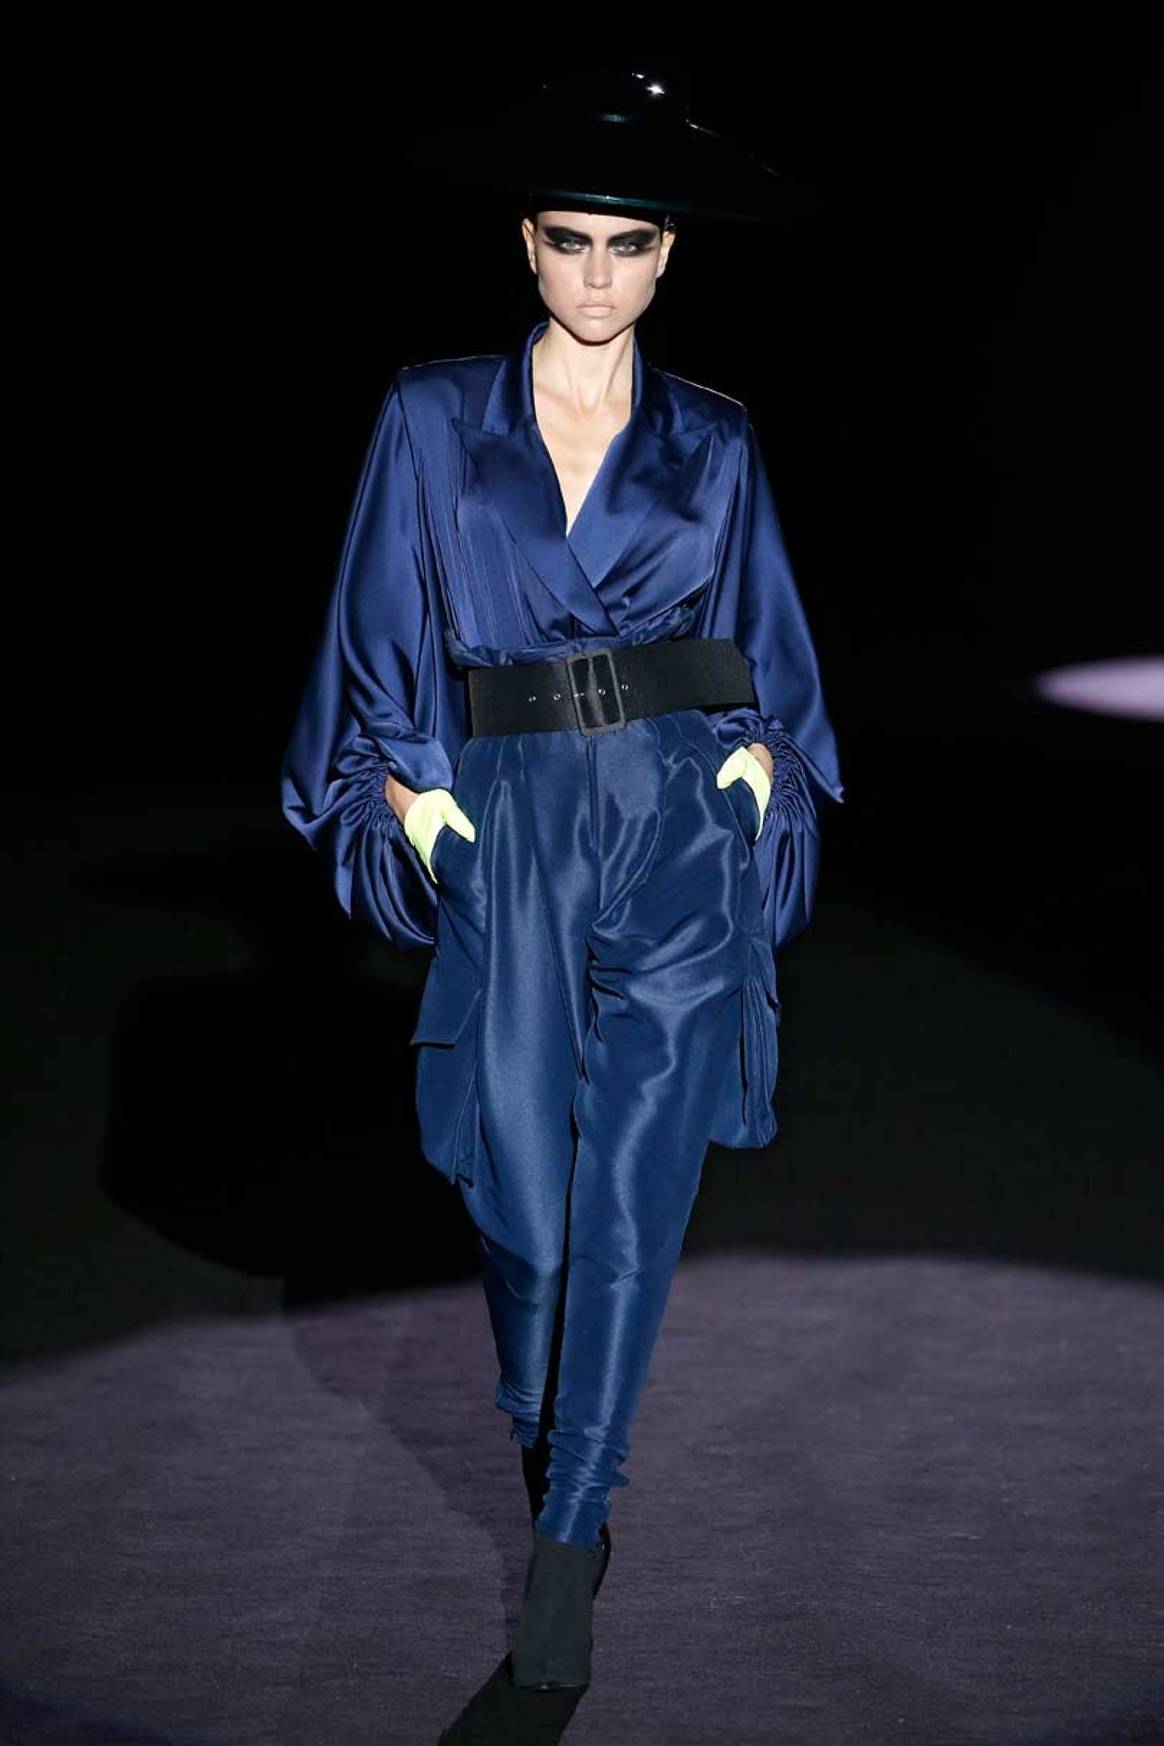 In pictures: highlighting young designers at MBFWMadrid AW19